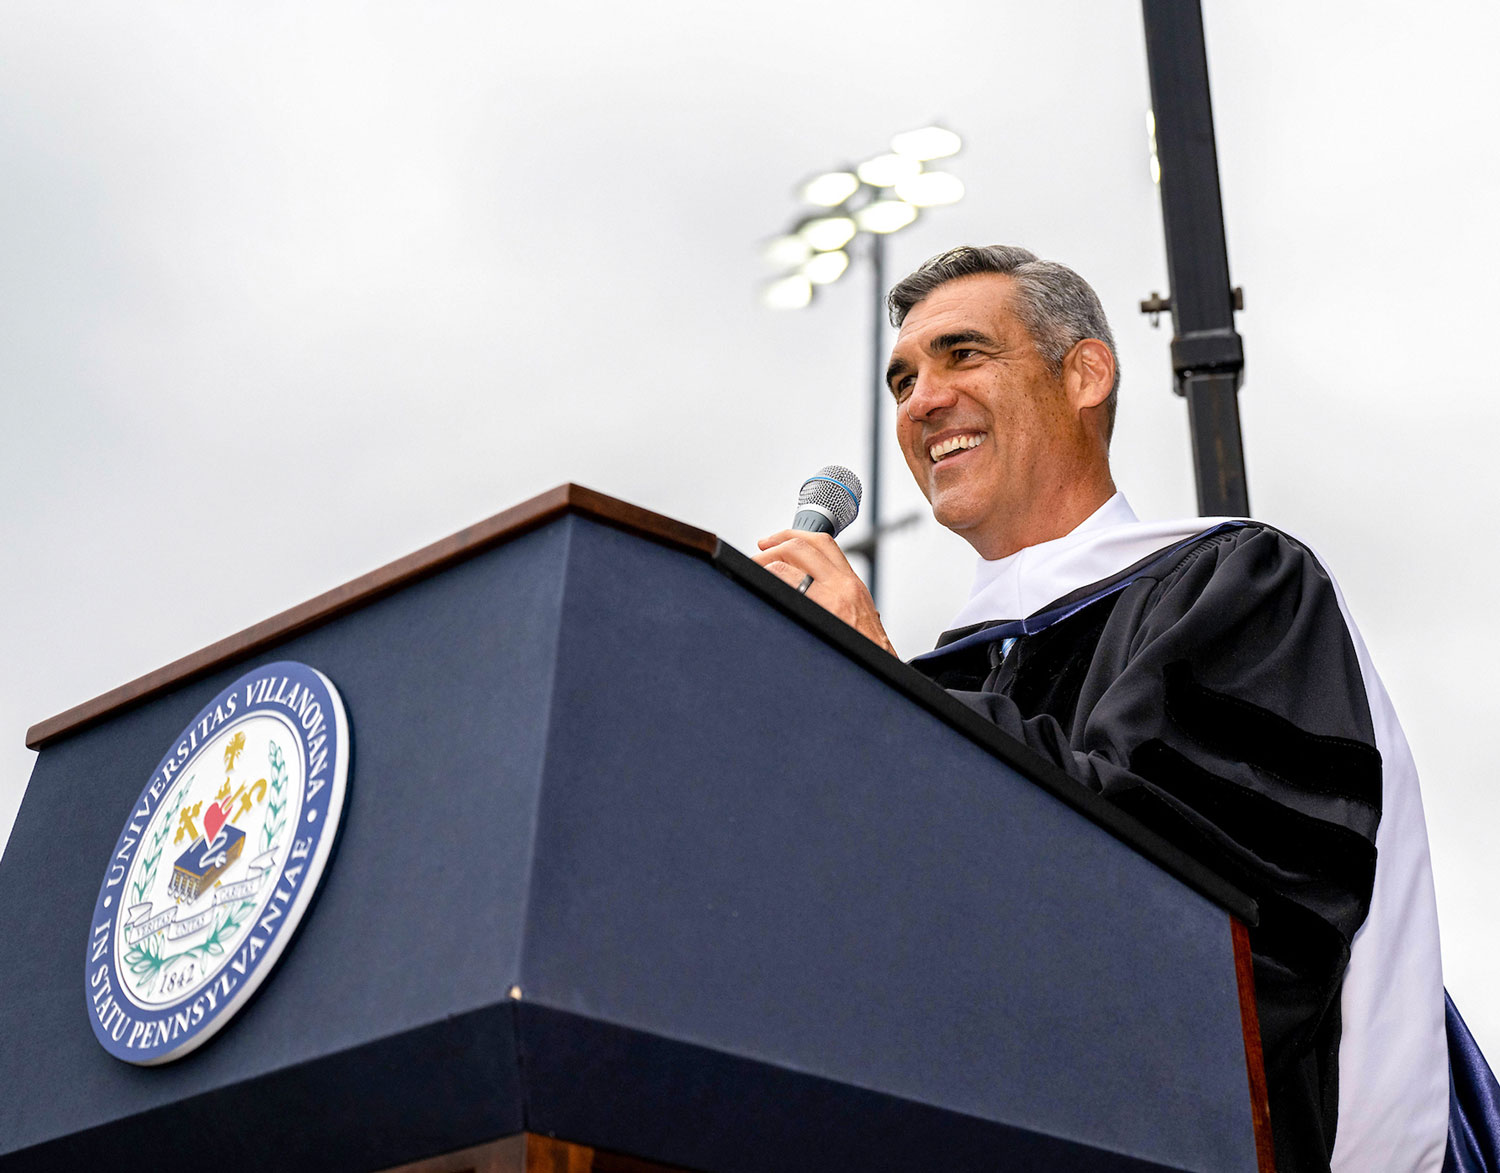 alumni speaker Jay Wright speaks into a podium microphone at an outdoor university event